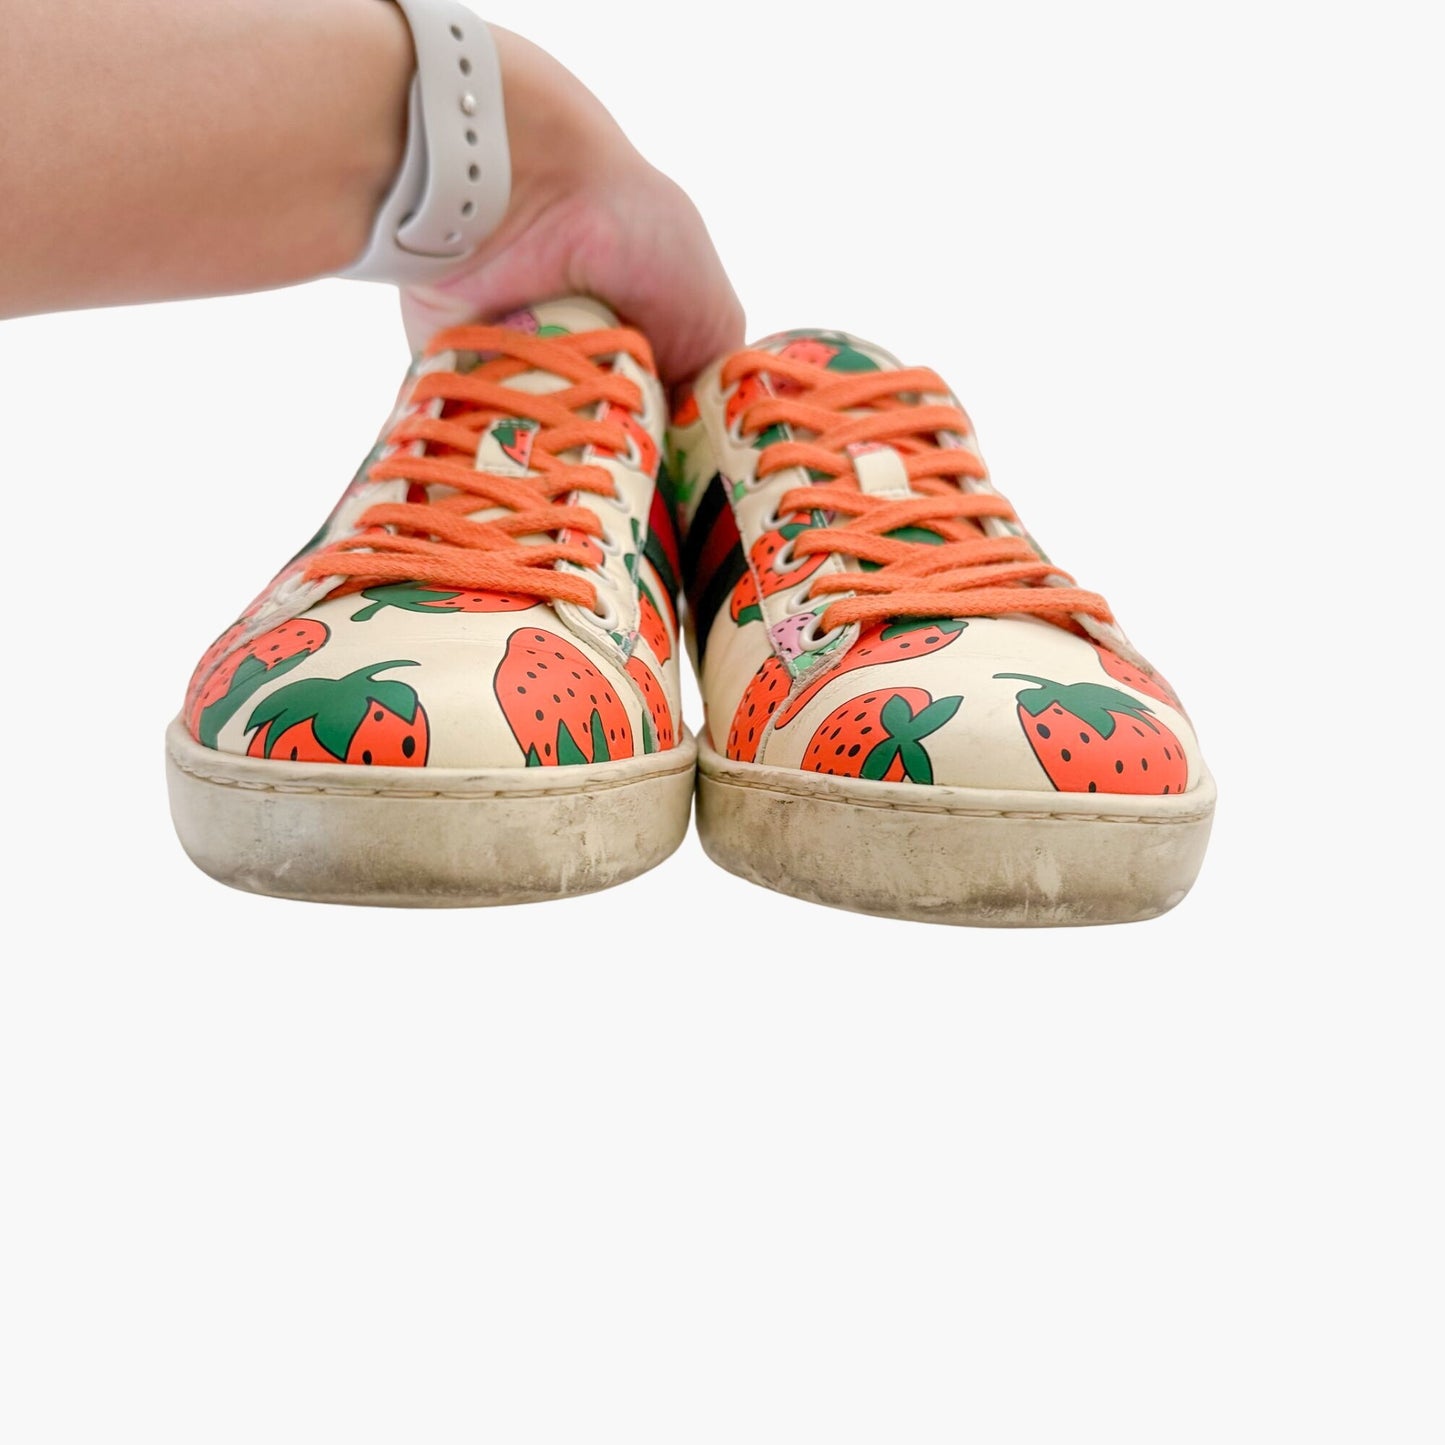 Gucci Ace Sneakers in Strawberry Cream Size 37